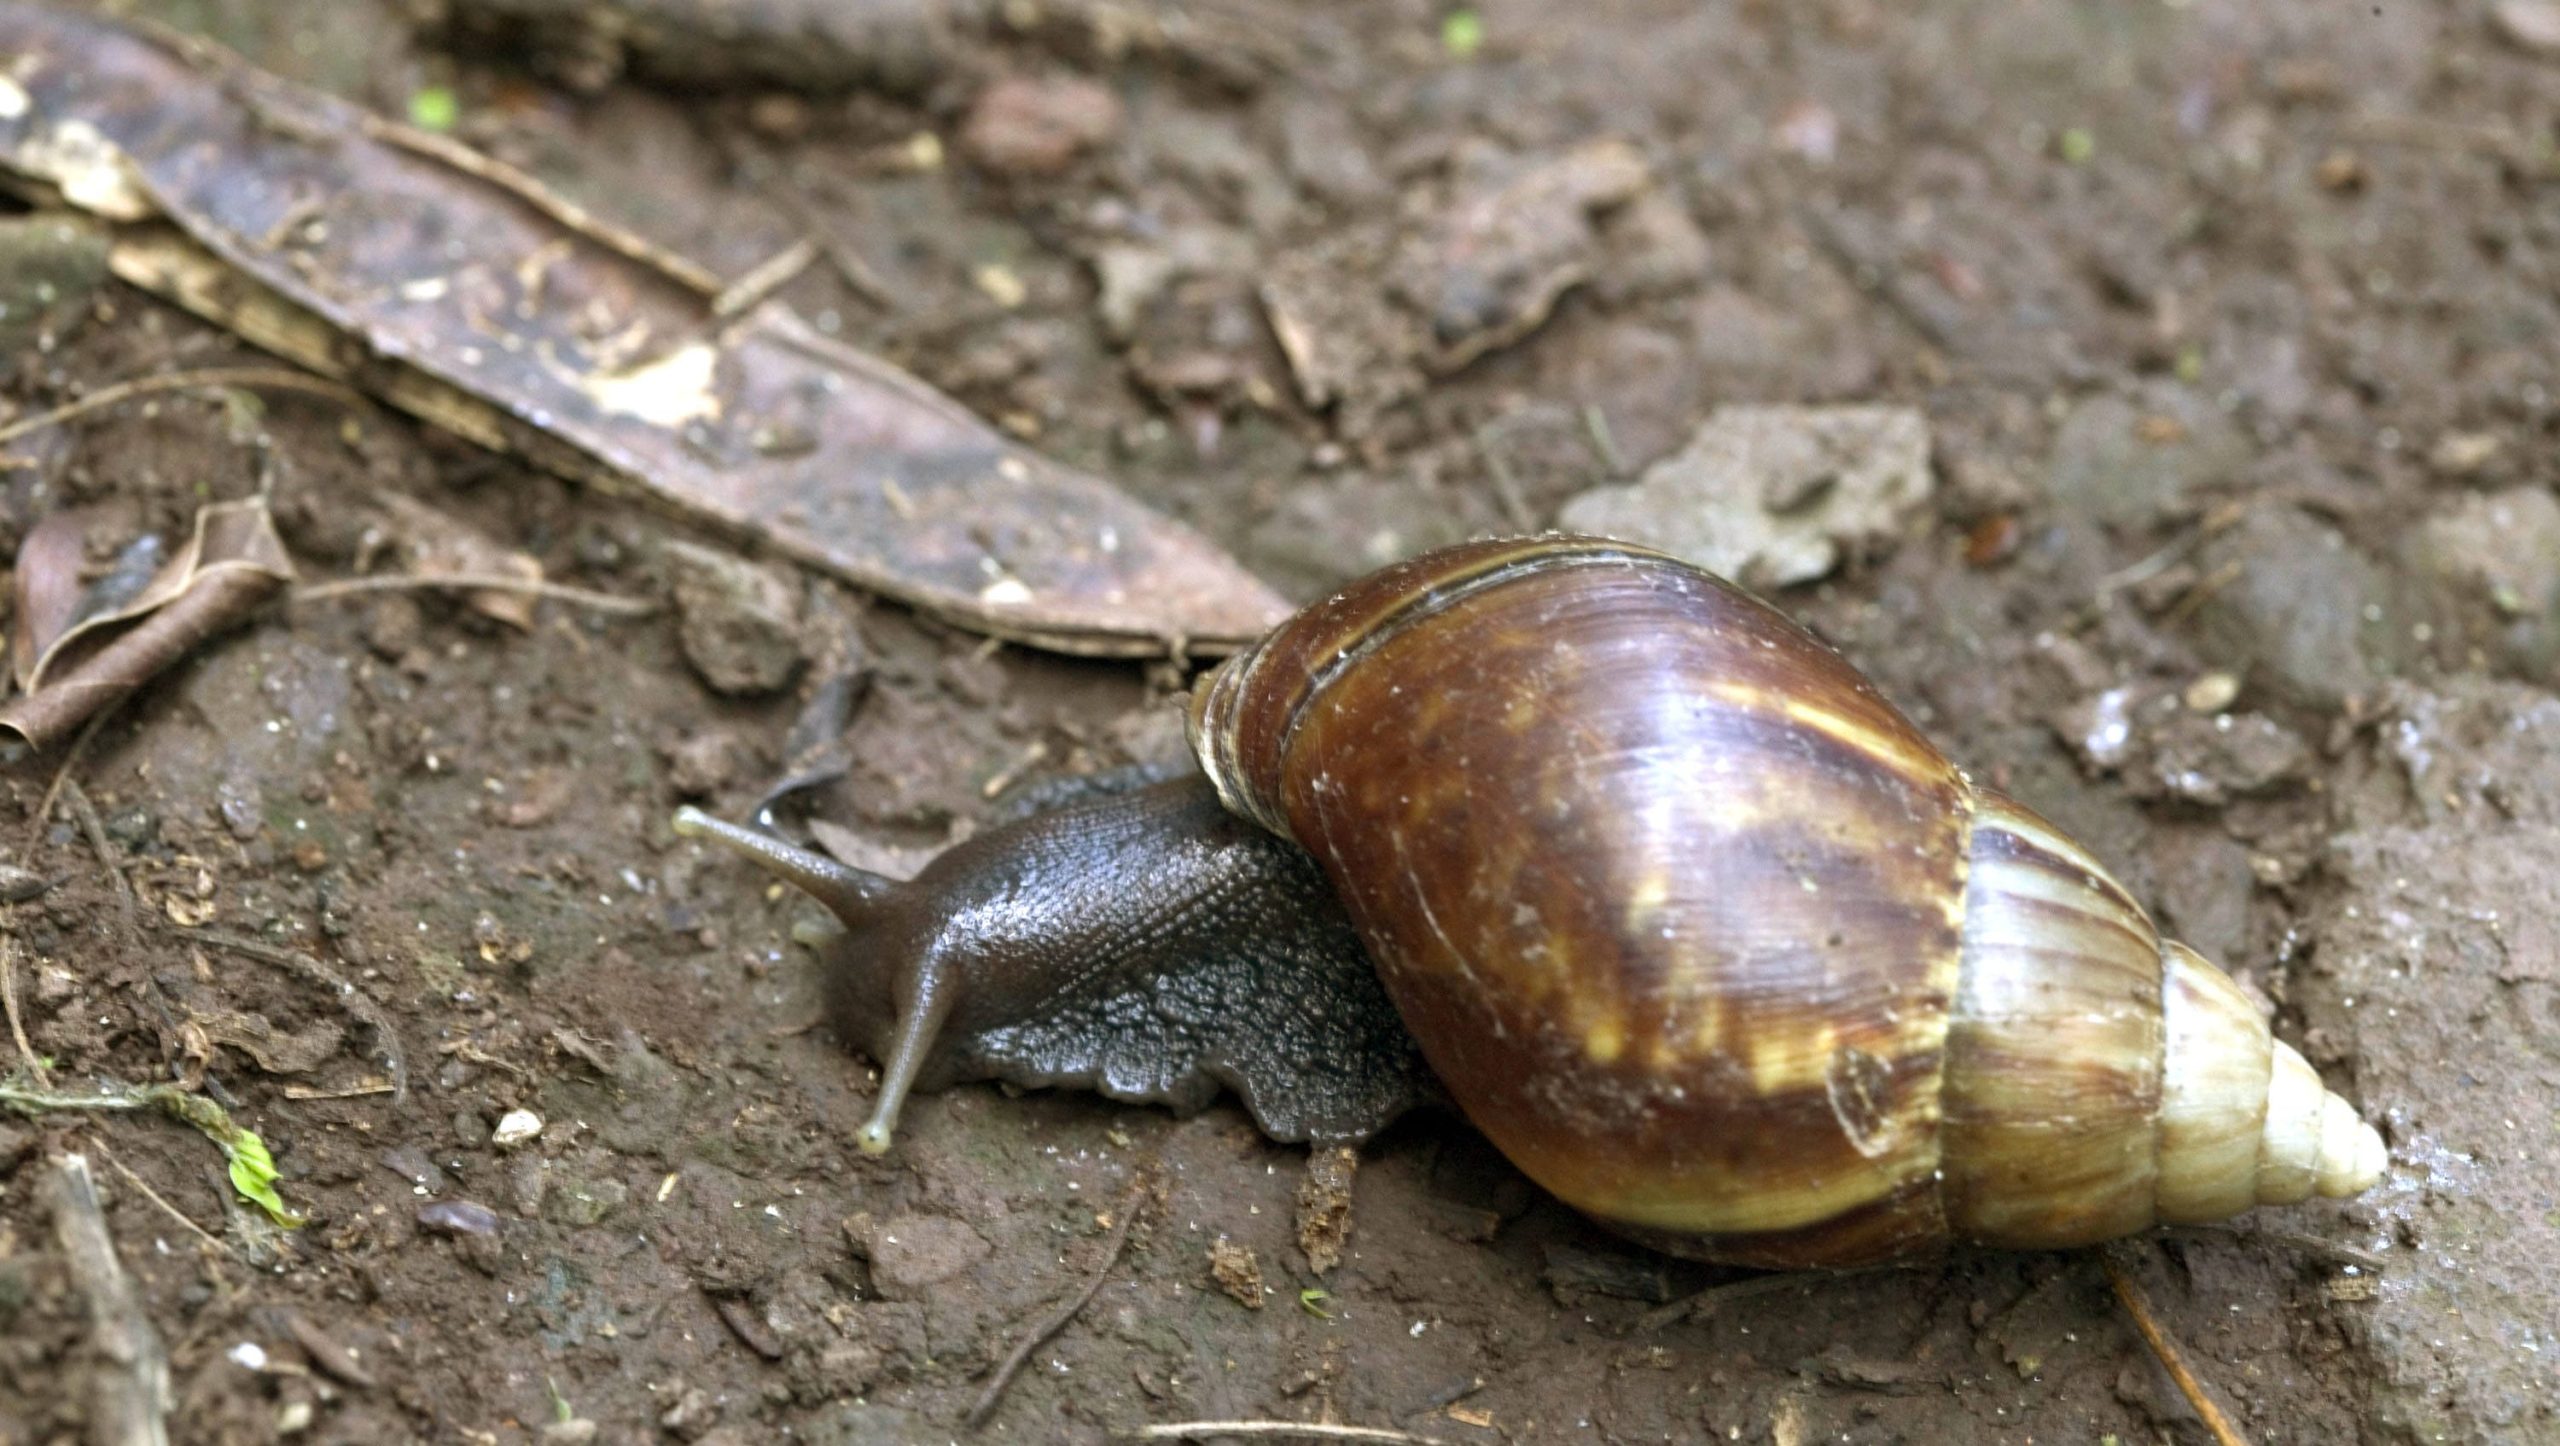 Giant African Land Snails: The Dangerous Invader Threatening Agriculture and Human Health 15